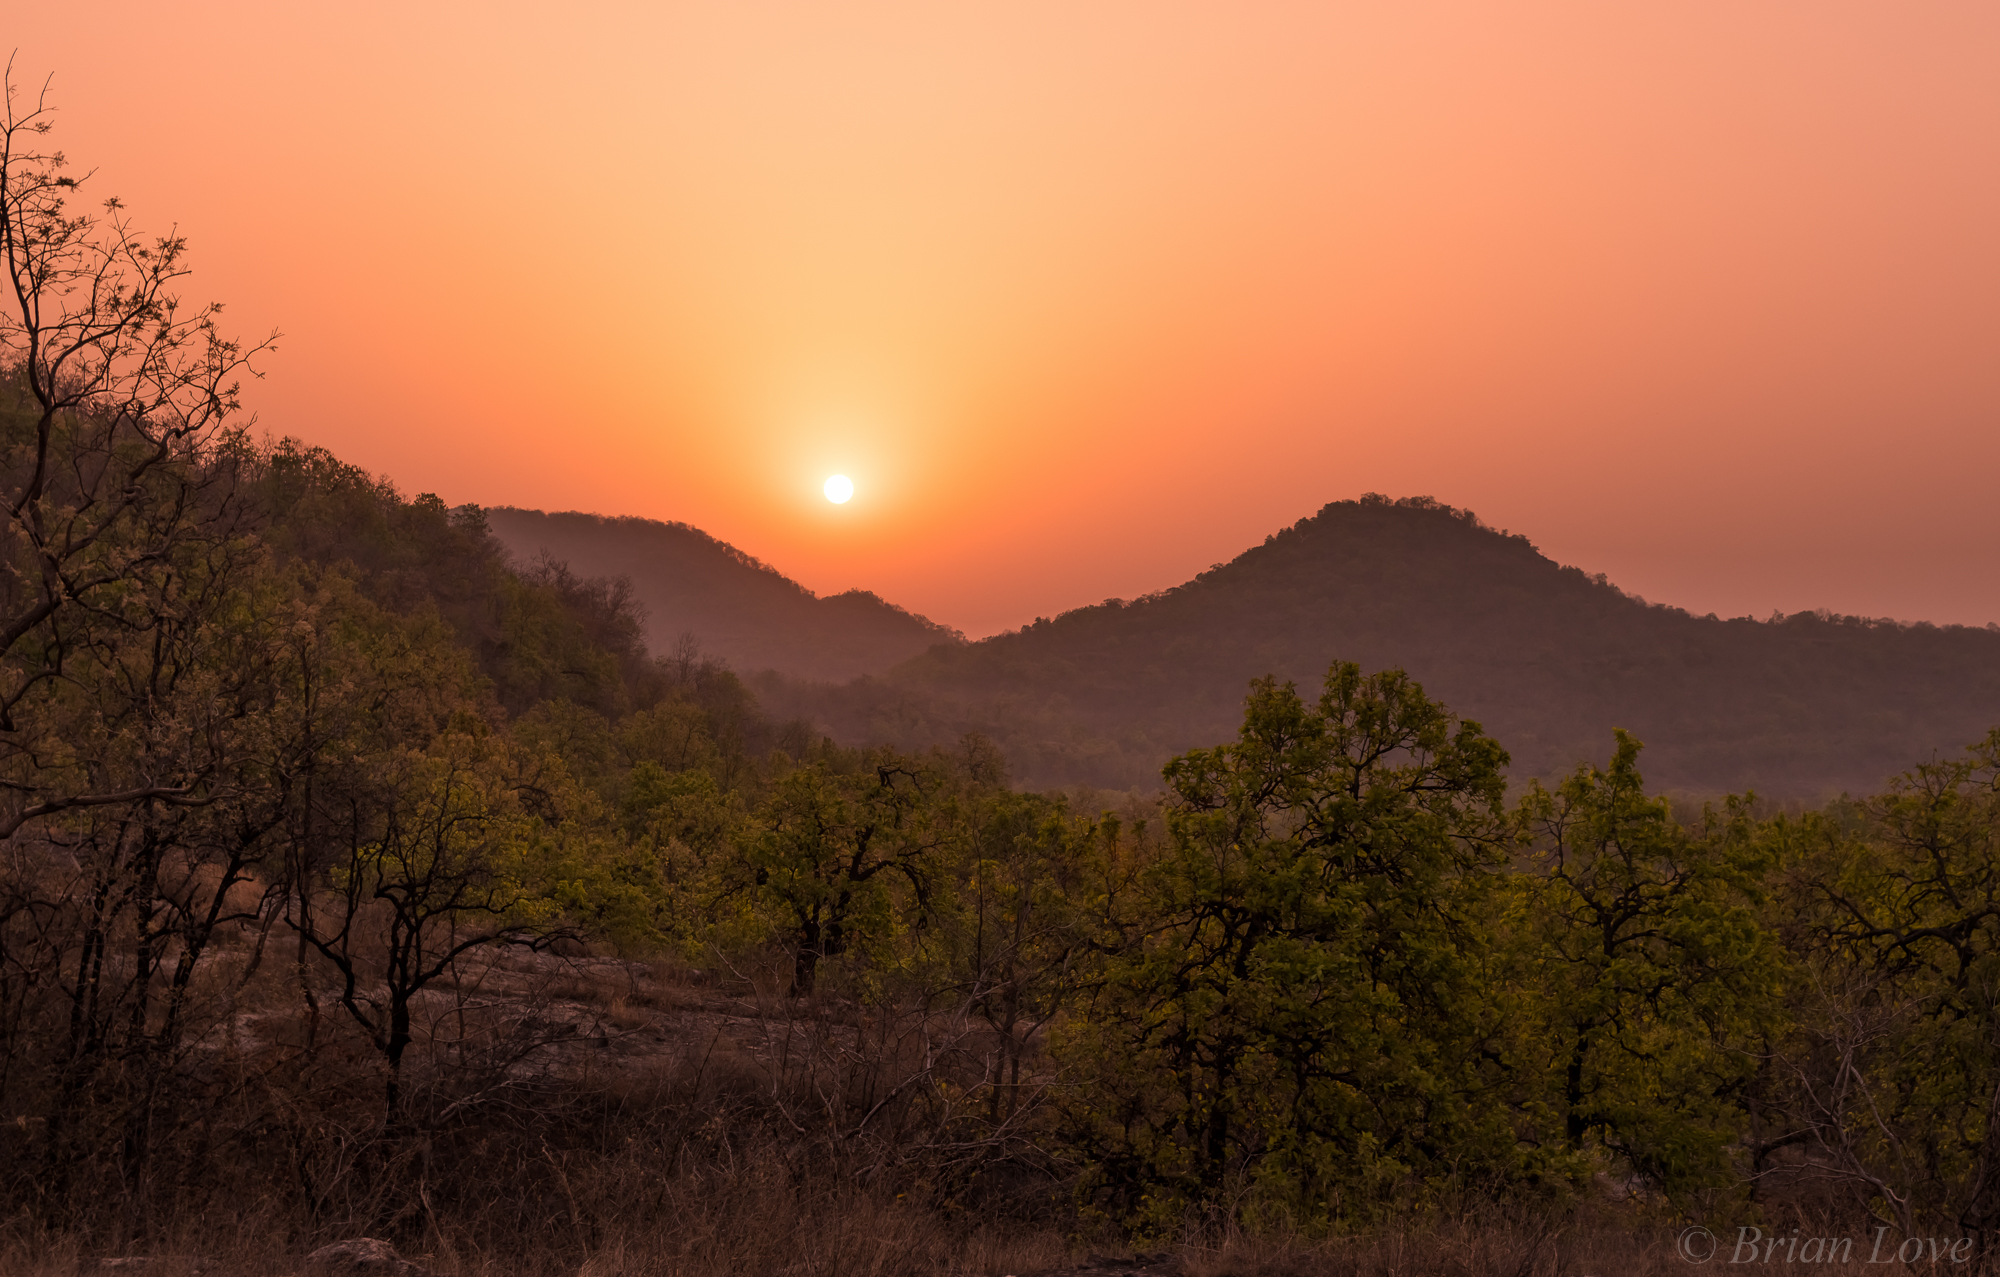 The Sun Rises On Another 42 Celsius Day In Bandhavgarh...